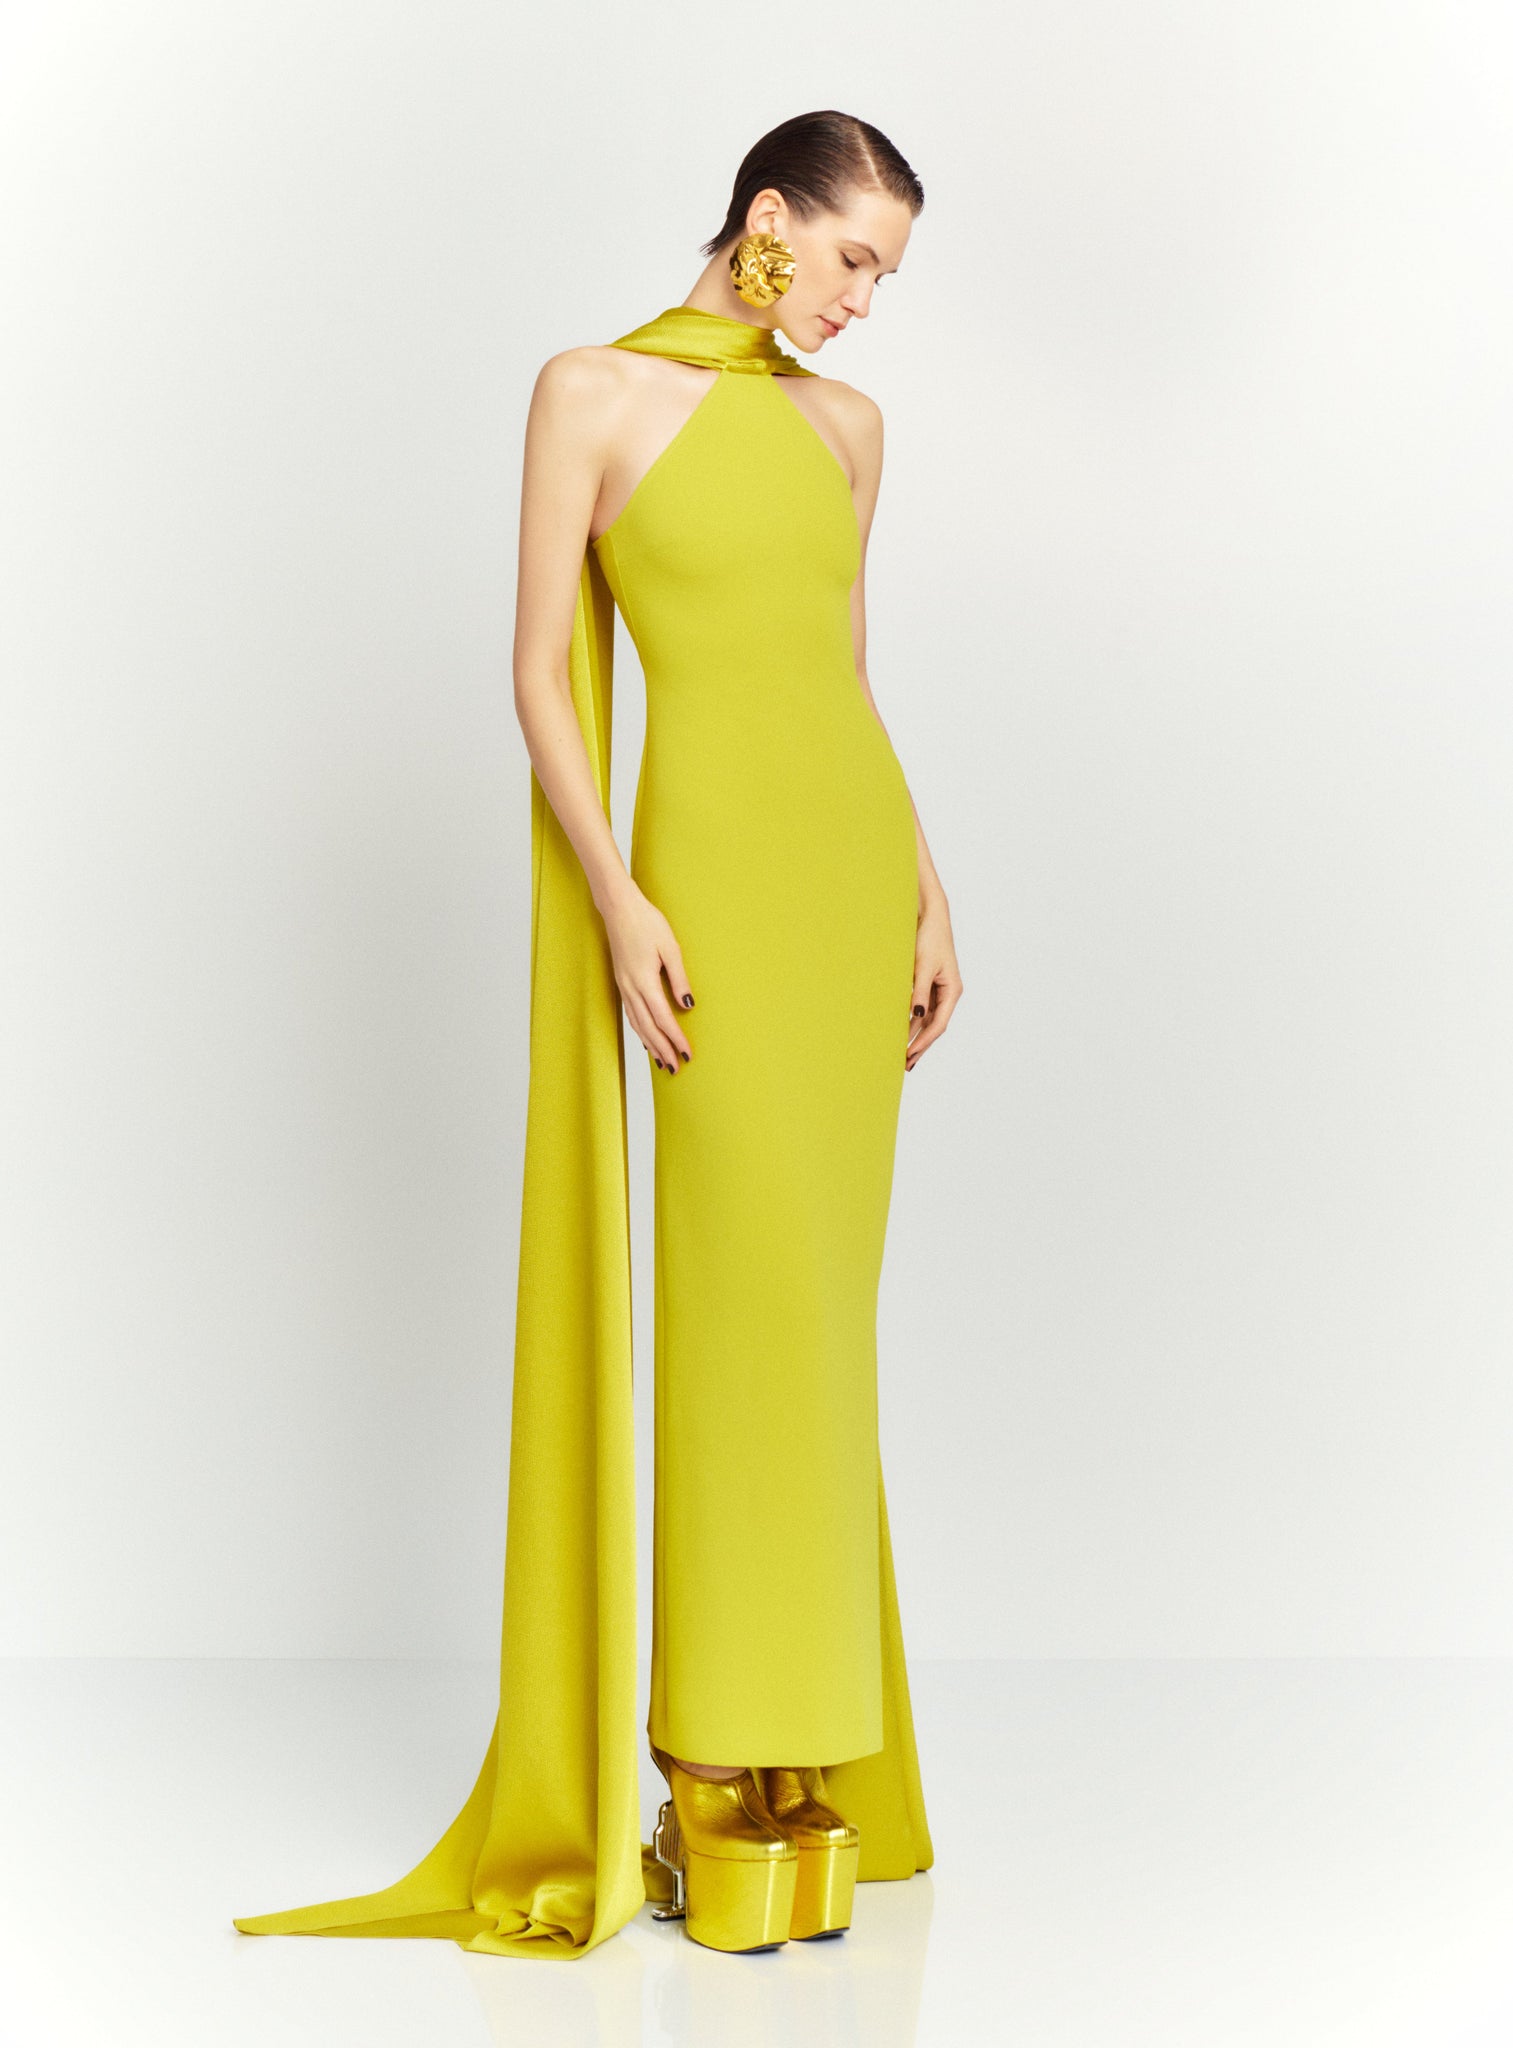 The Ophelia Maxi Dress in Chartreuse